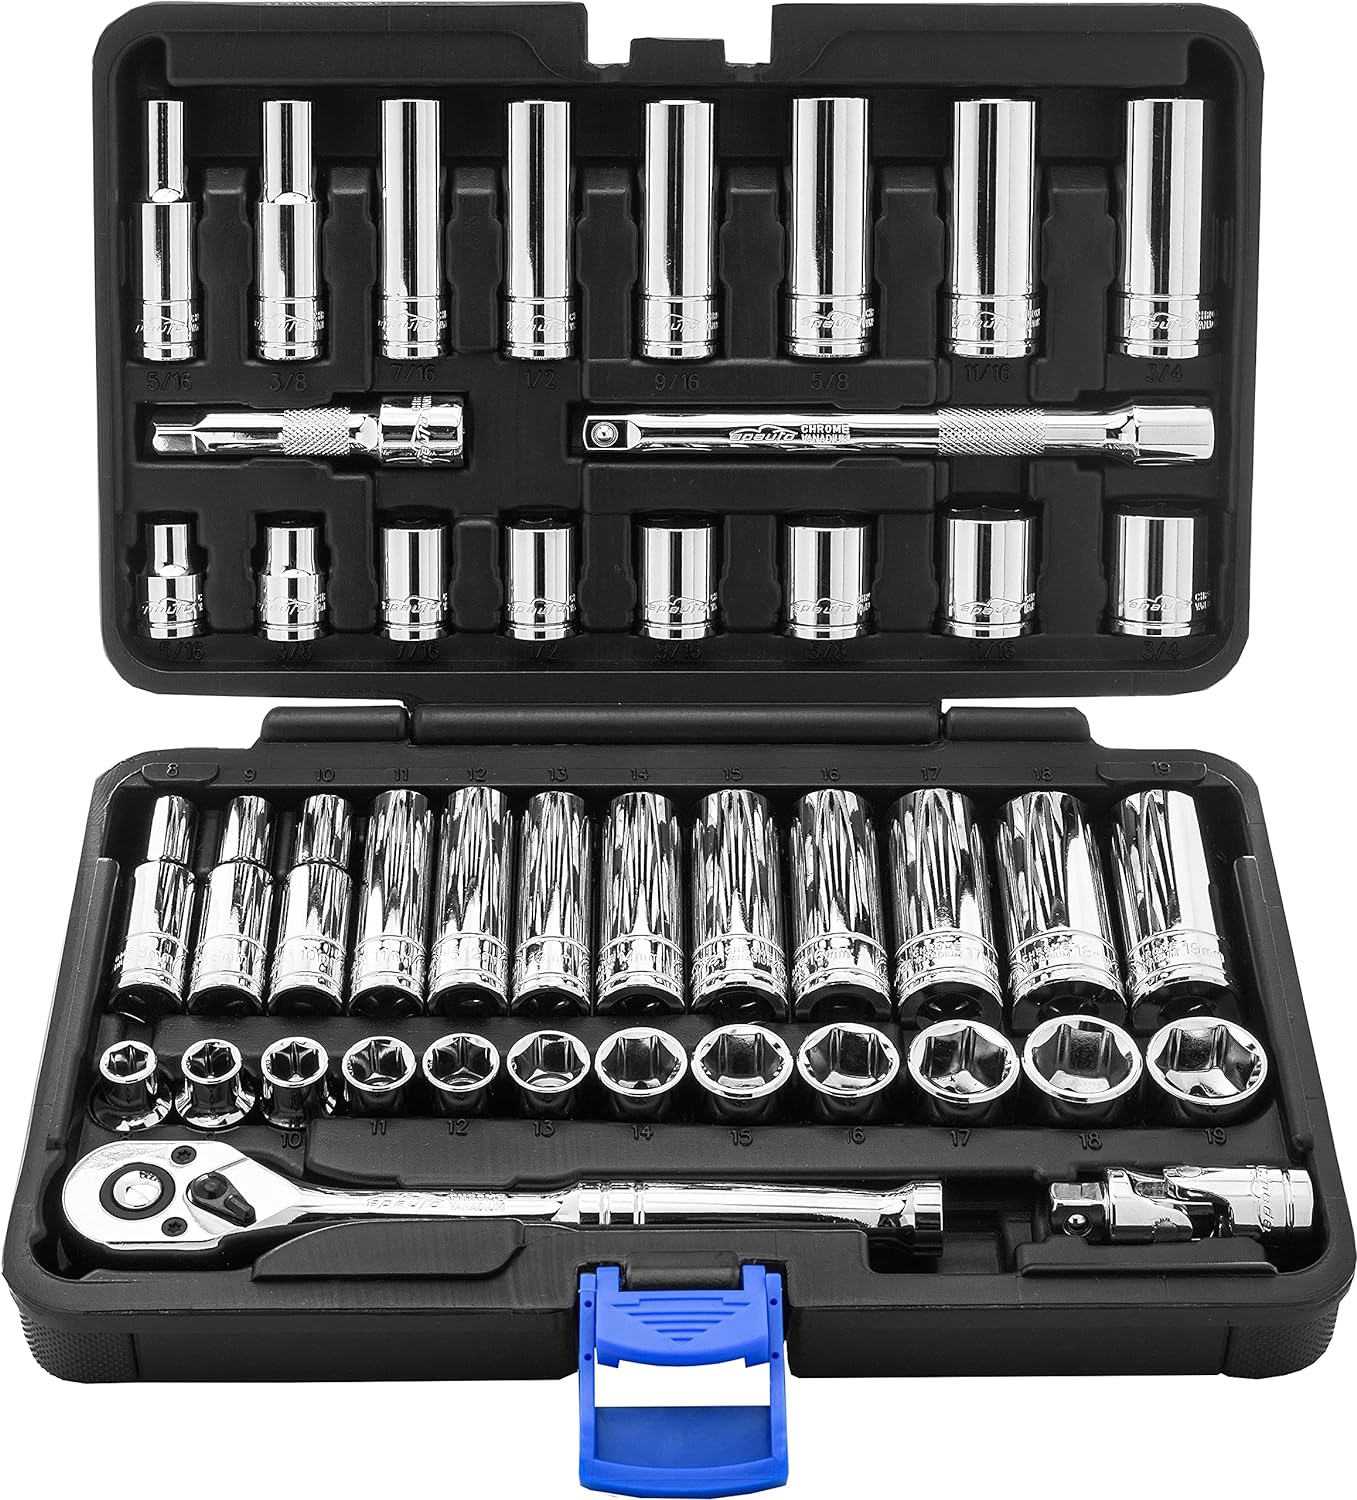 45-Piece 3/8 "Socket Set with 72-Tooth Pear Head Ratchet